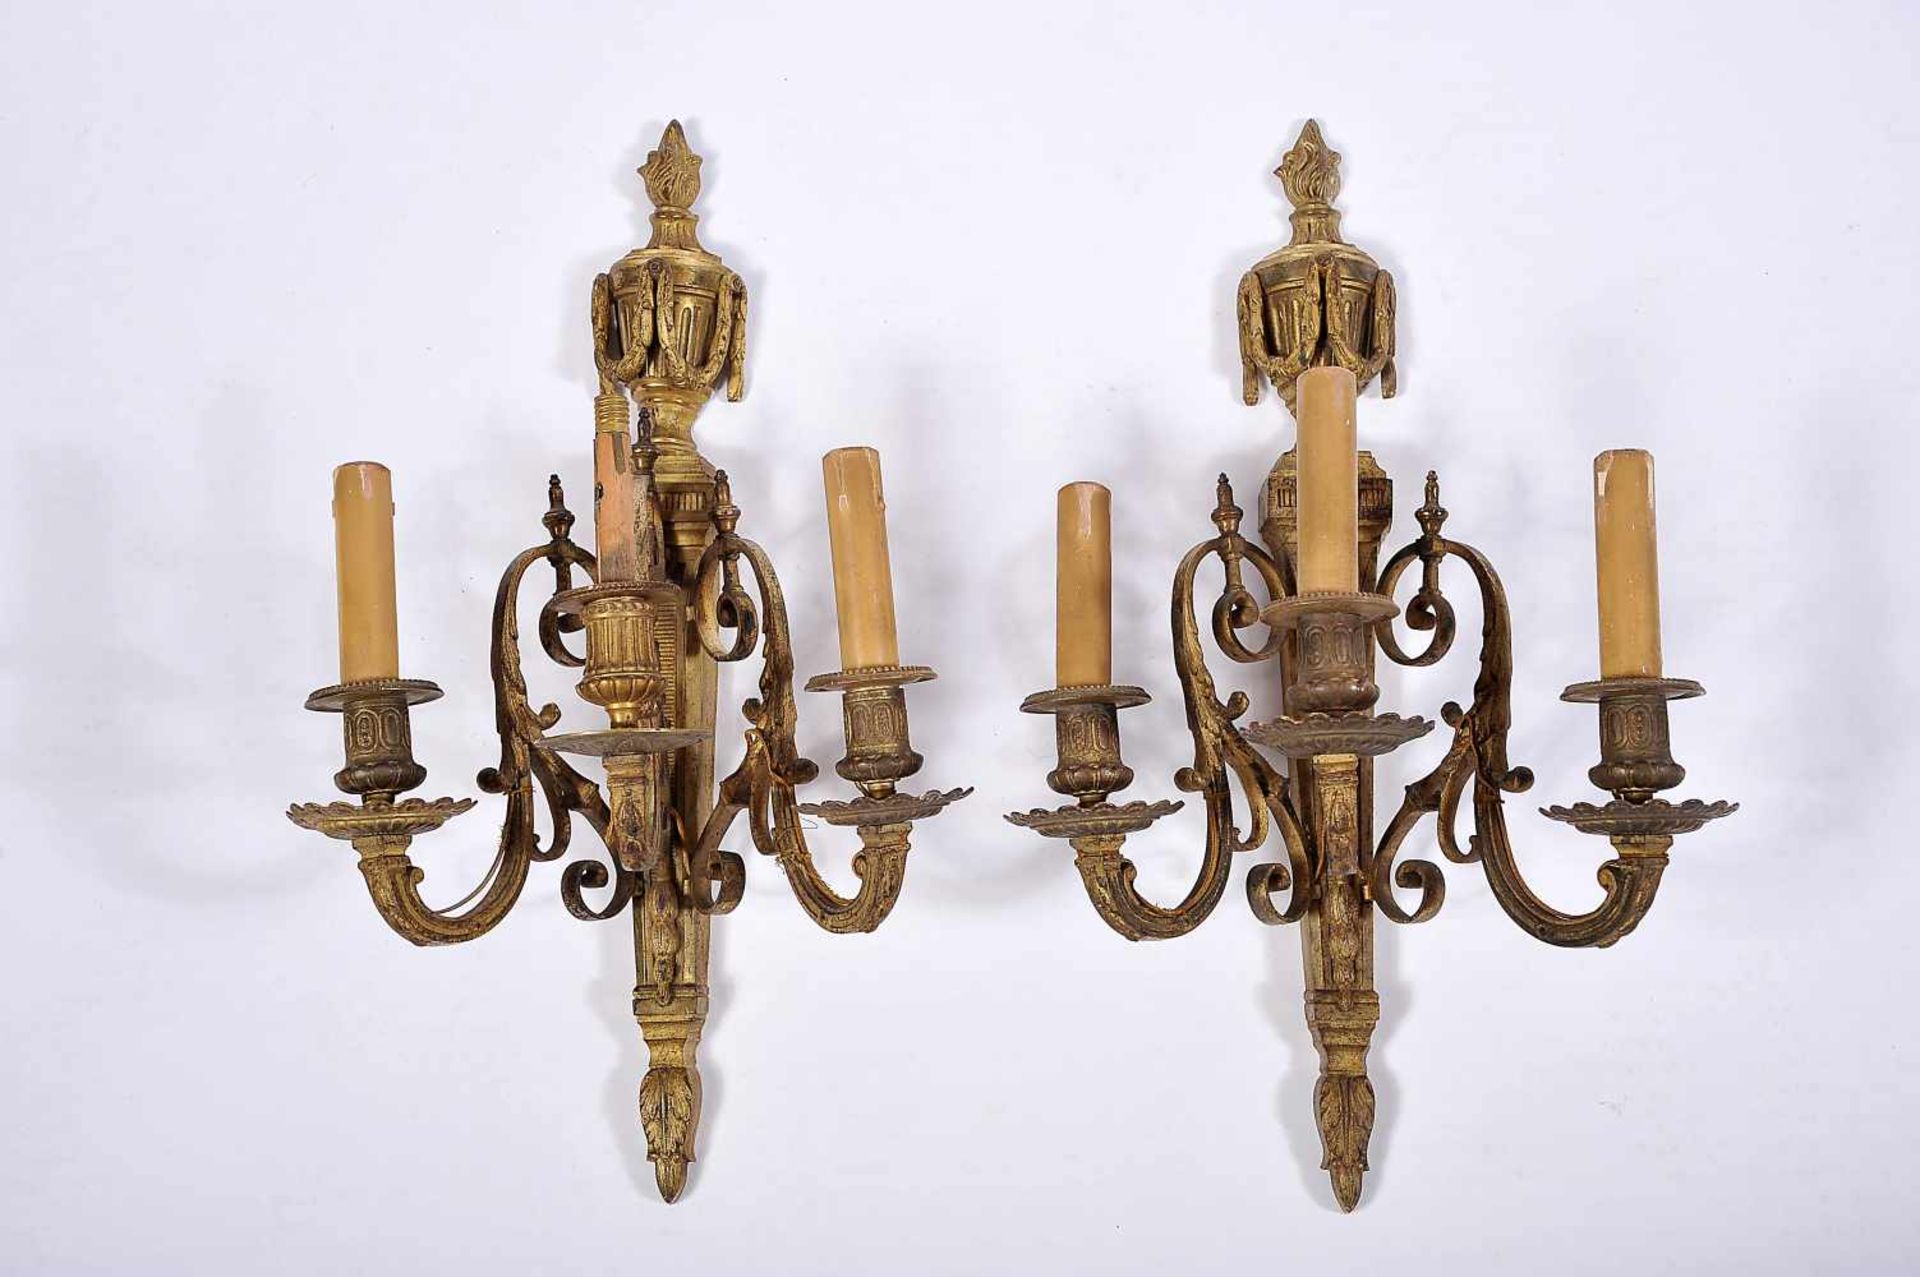 A Pair of Three-light Wall Sconces, Louis XVI style, chiselled and gilt bronze en relief, French,